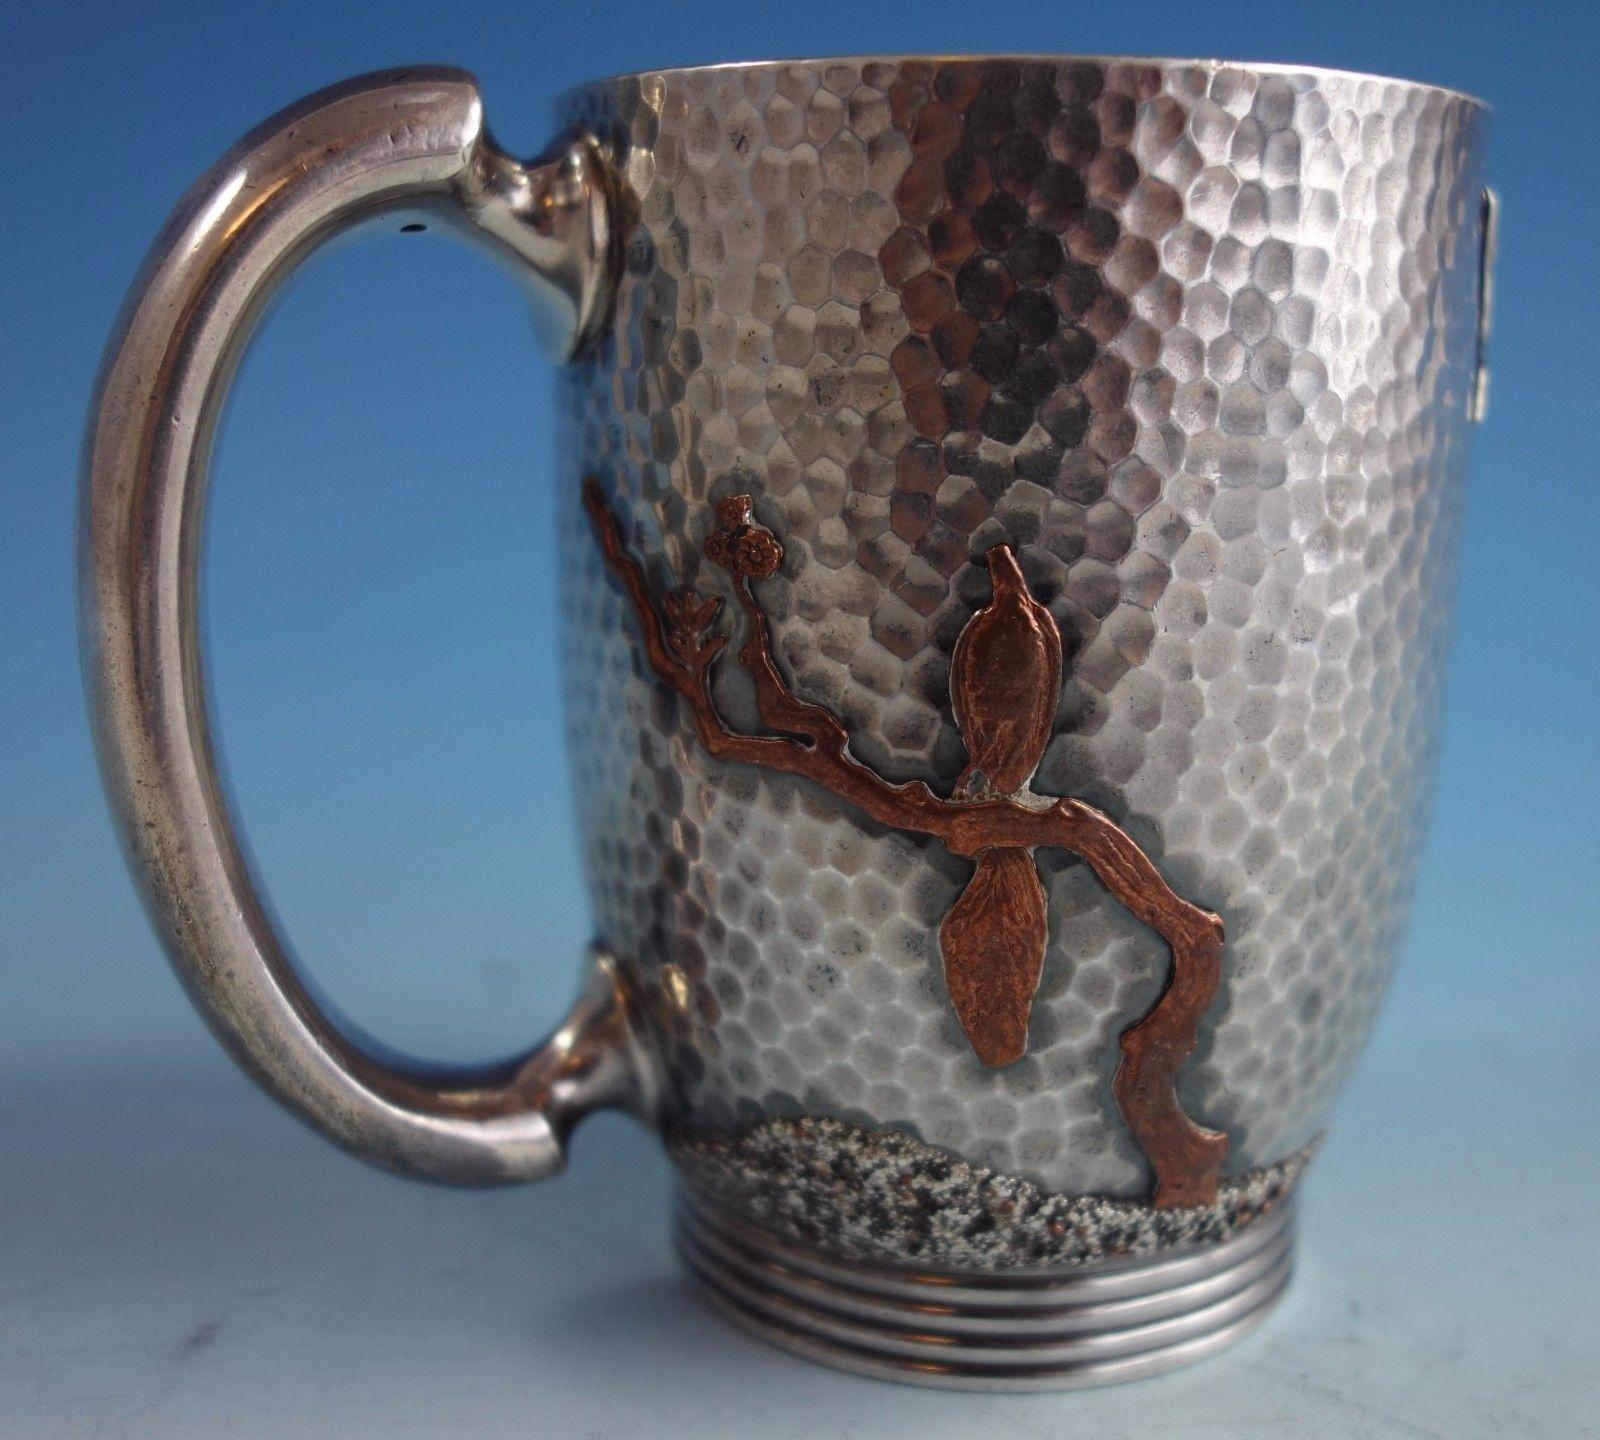 19th Century Mixed Metals by Gorham Sterling Silver Baby Cup #3210 Hammered